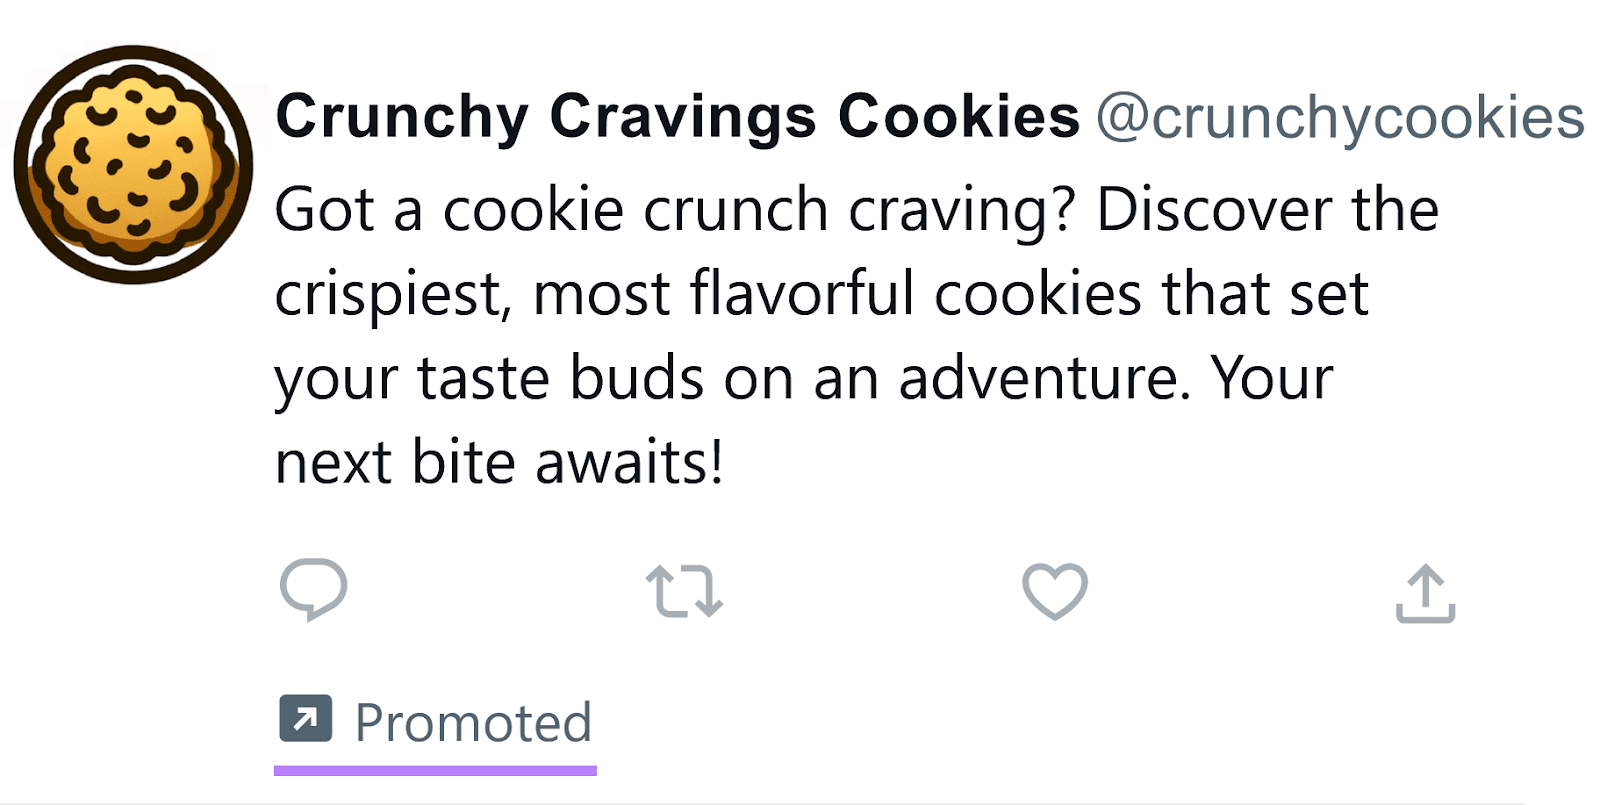 Crunchy Cravings Cookies's station  connected  X, marked arsenic  “Promoted”